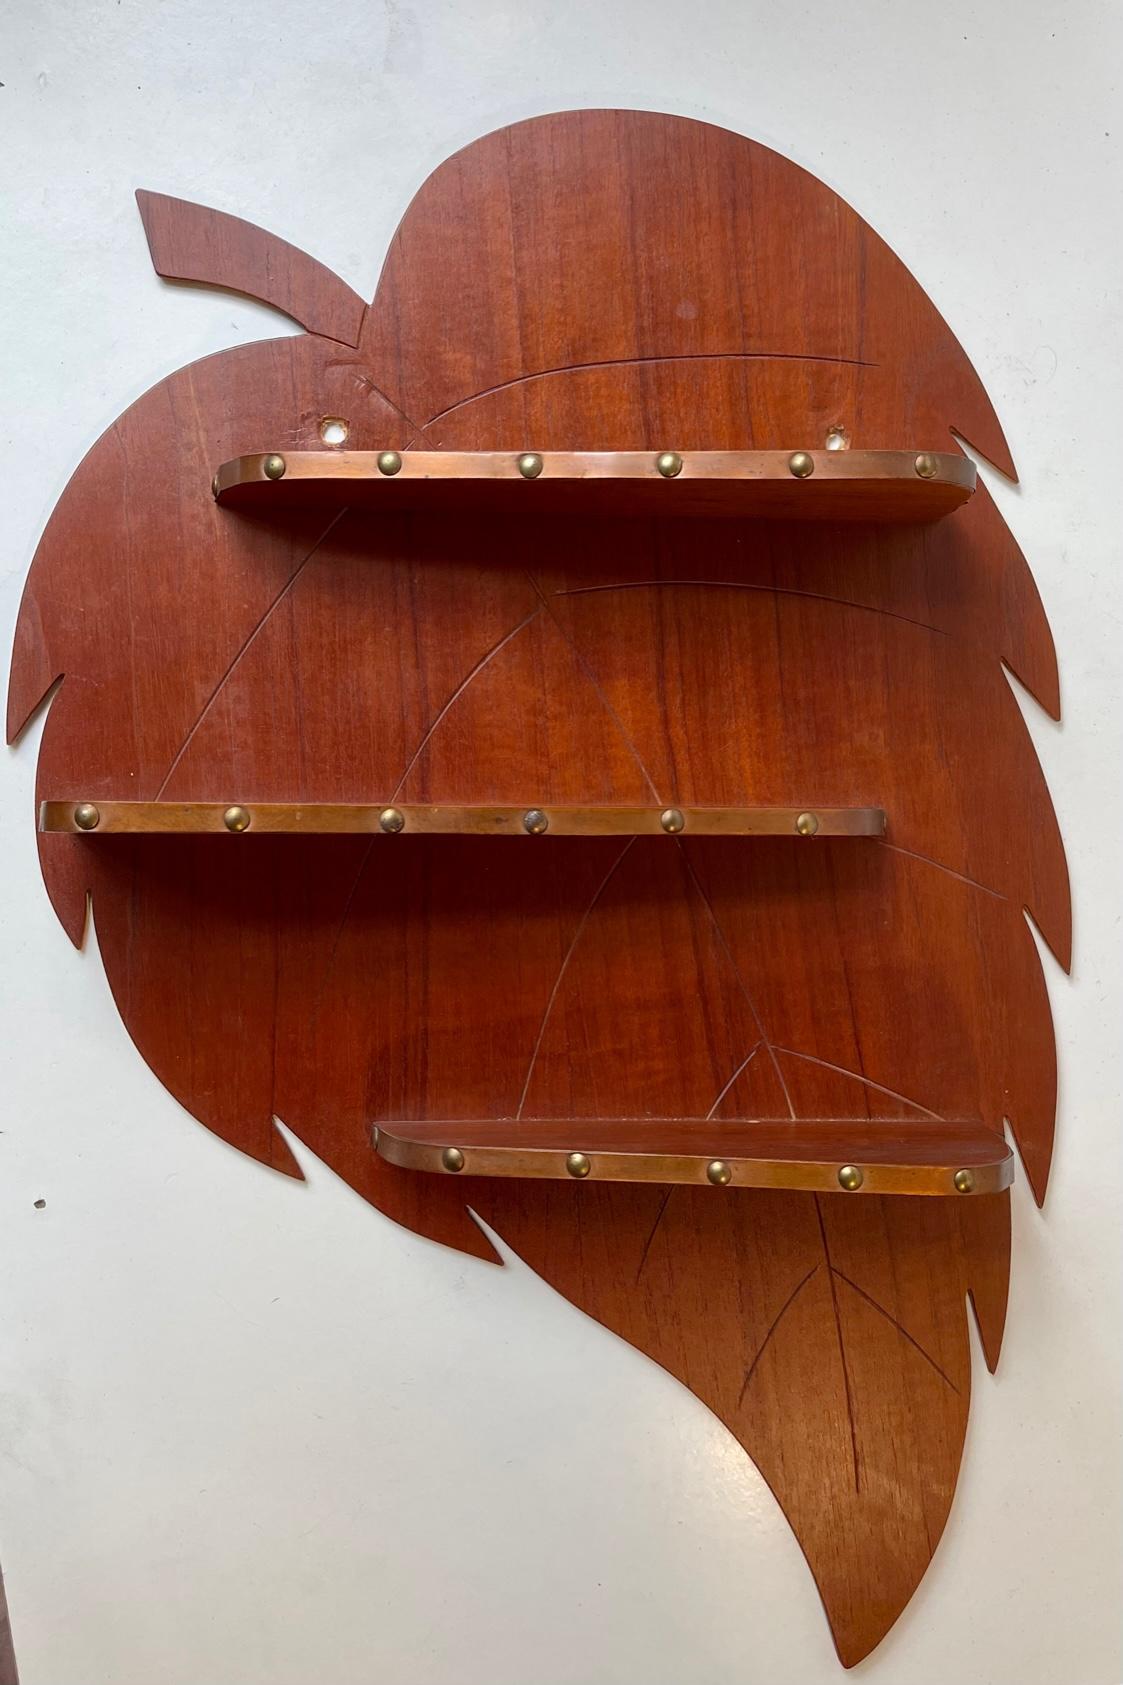 Skillfully crafted wall mounted spice-rack or display-shelf in shape of a giant leaf. The 3 asymmetrical shelves features decor in copper-band. Crafted by anonymous furniture maker in Denmark during the 1960s. Measurements: H: 60 cm, W: 40 cm, Dept: